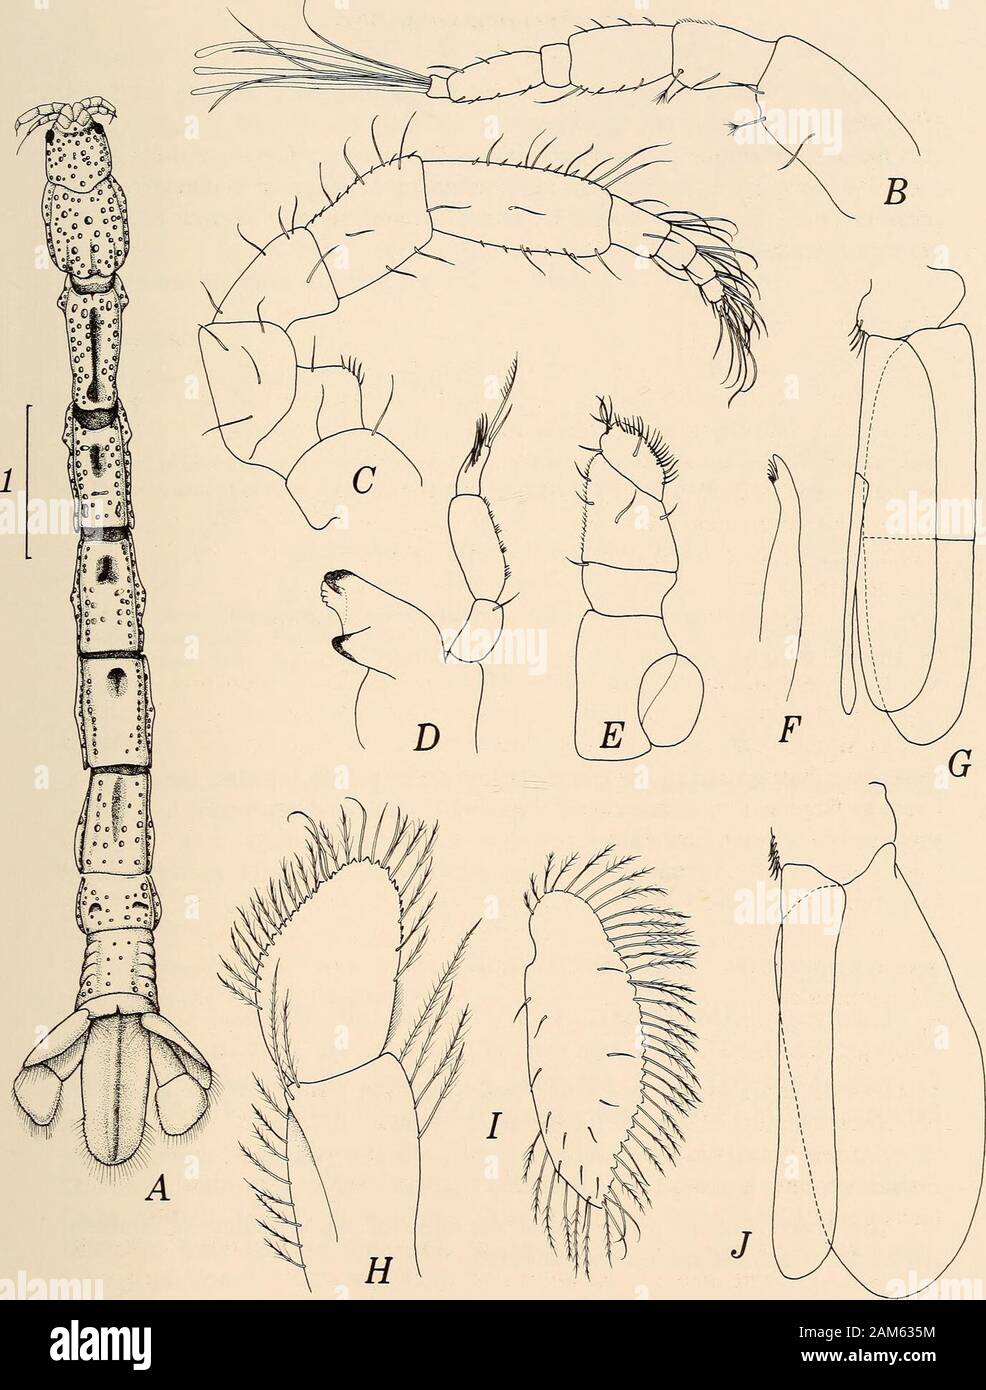 Annals of the South African Museum = Annale van die Suid-Afrikaanse Museum . les; endite absent. Pereopod 1 unguis more than half length ofdactylus; propodus expanded proximally, palm gently concave, with fivesubmarginal spines; carpus triangular, distal rounded lobe bearing spine-scales,Pereopod 2 unguis half length of dactylus, with strong auxiUary spine at base;propodus rectangular, with strong sensory spine at posterodistal corner,posterior margin bearing fringed scales; carpus triangular, with strongposterodistal spine. Pleopod 1 exopod operculiform, subequal in length andabout three time Stock Photo